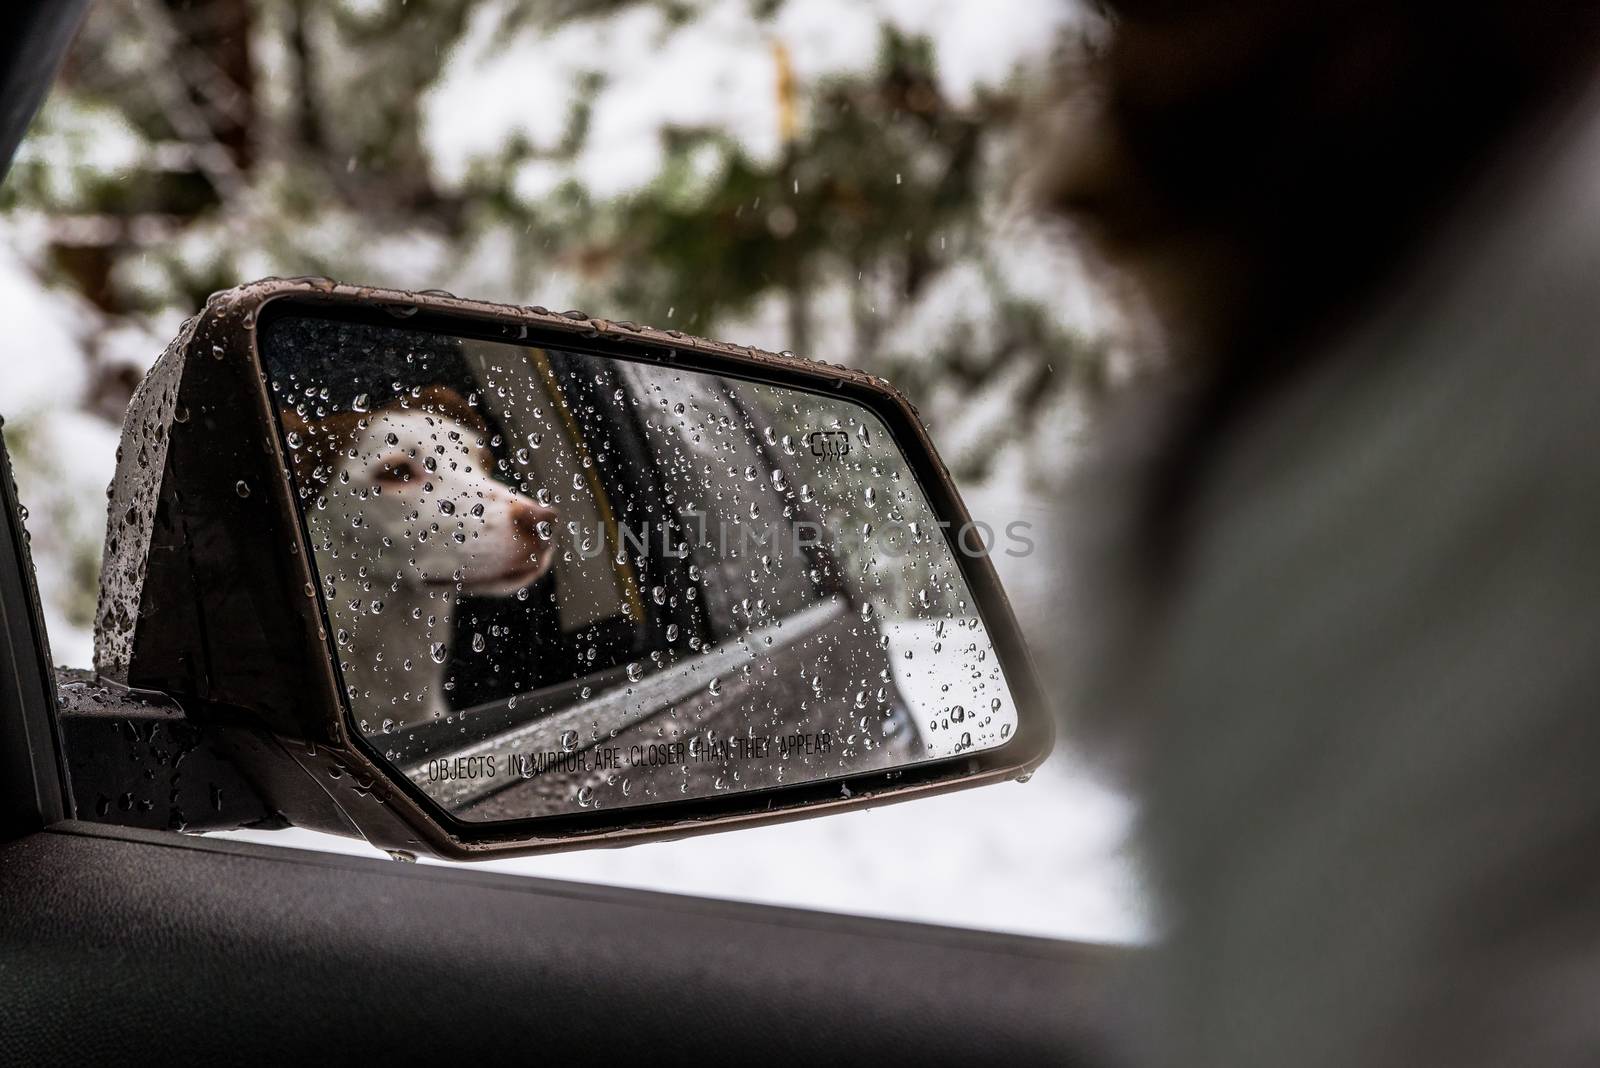 Rainy reflection of a young dog in the rear-view side mirror of a car by Pendleton